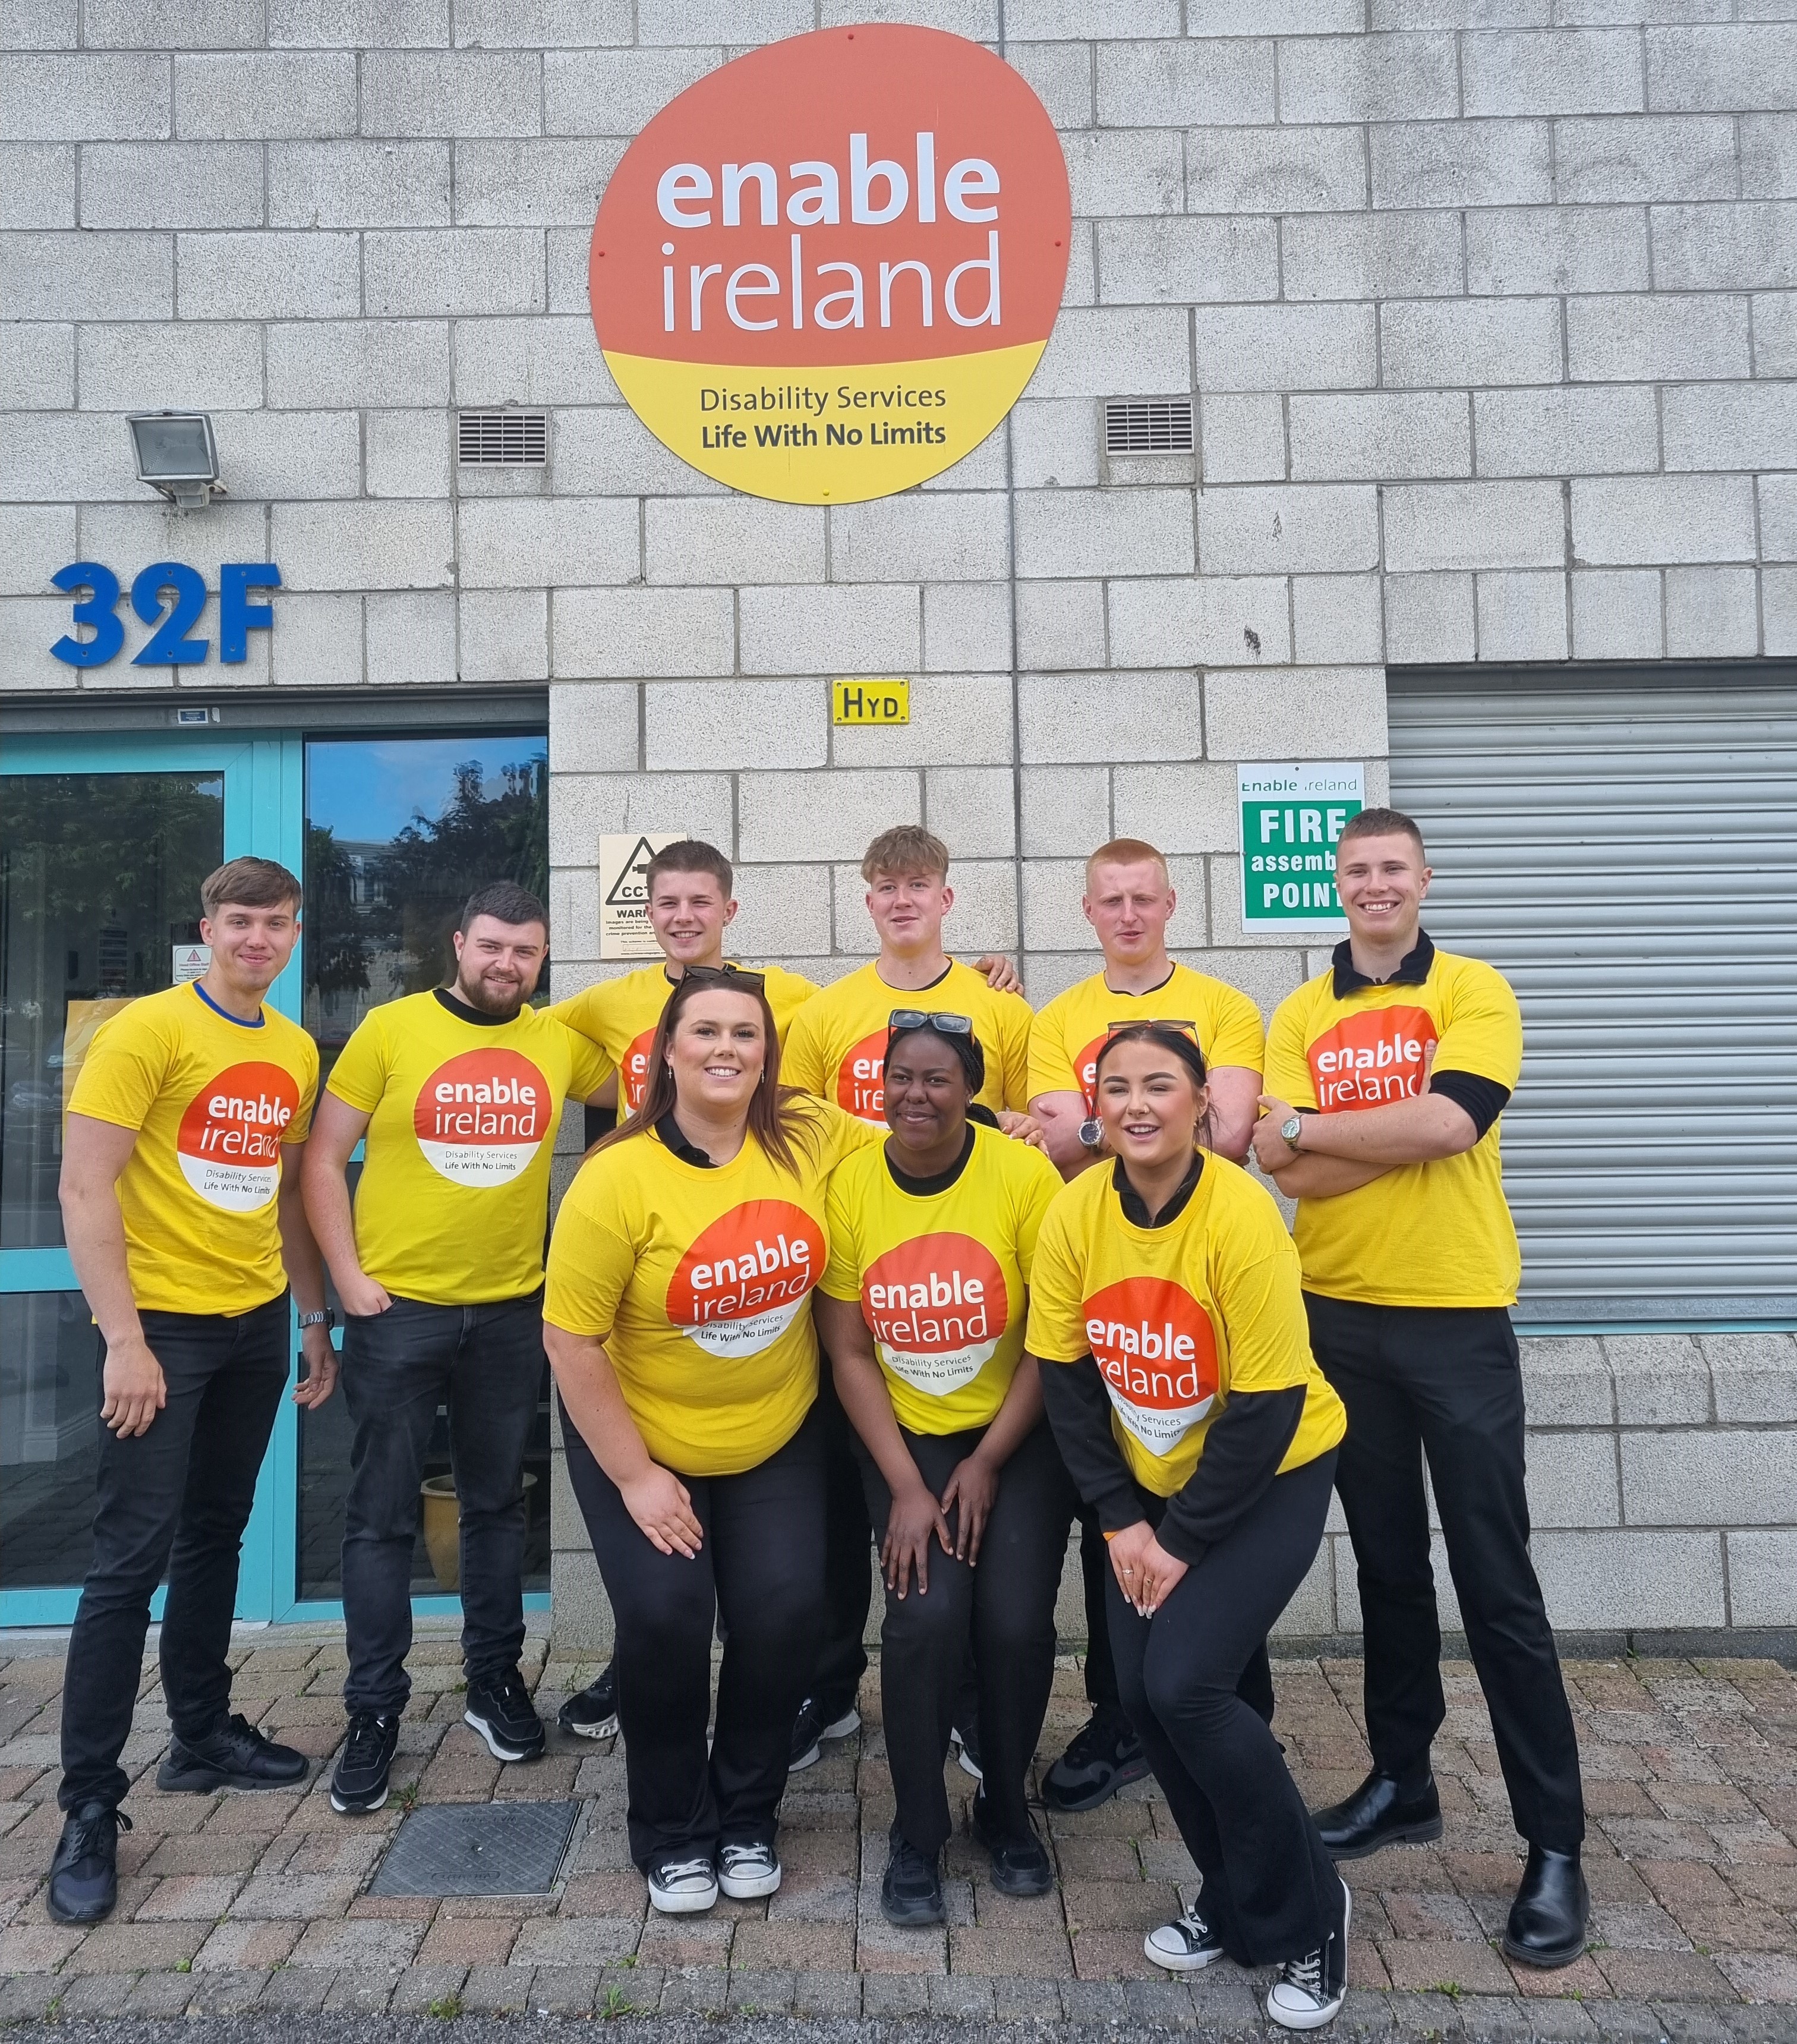 Enable Ireland's Face-to-Face fundraising team standing together outside the Enable Ireland Headquarters in yellow Enable Ireland t-shirts